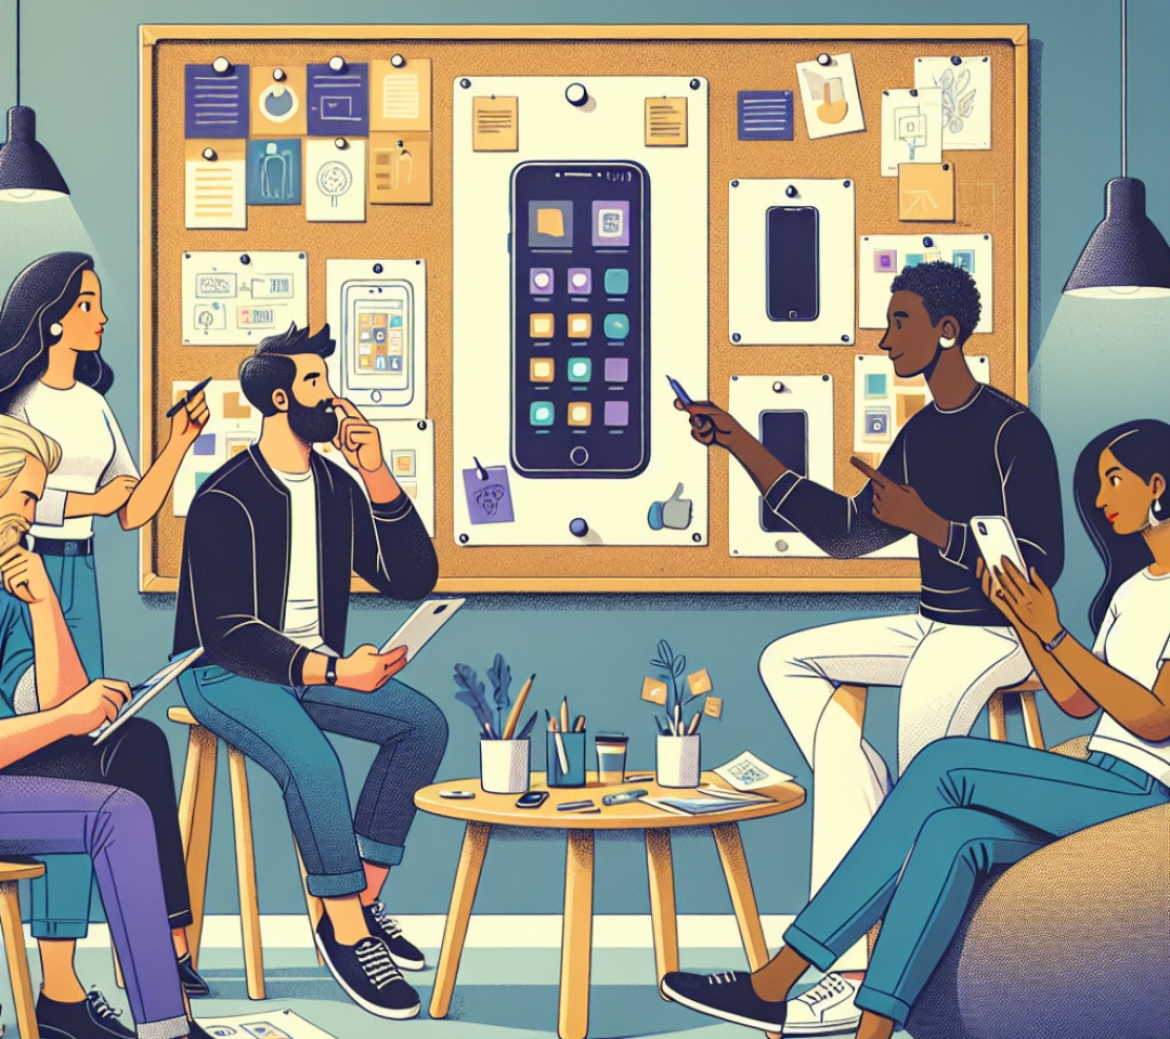 Design Thinking: The Analogy with a New Phone Project